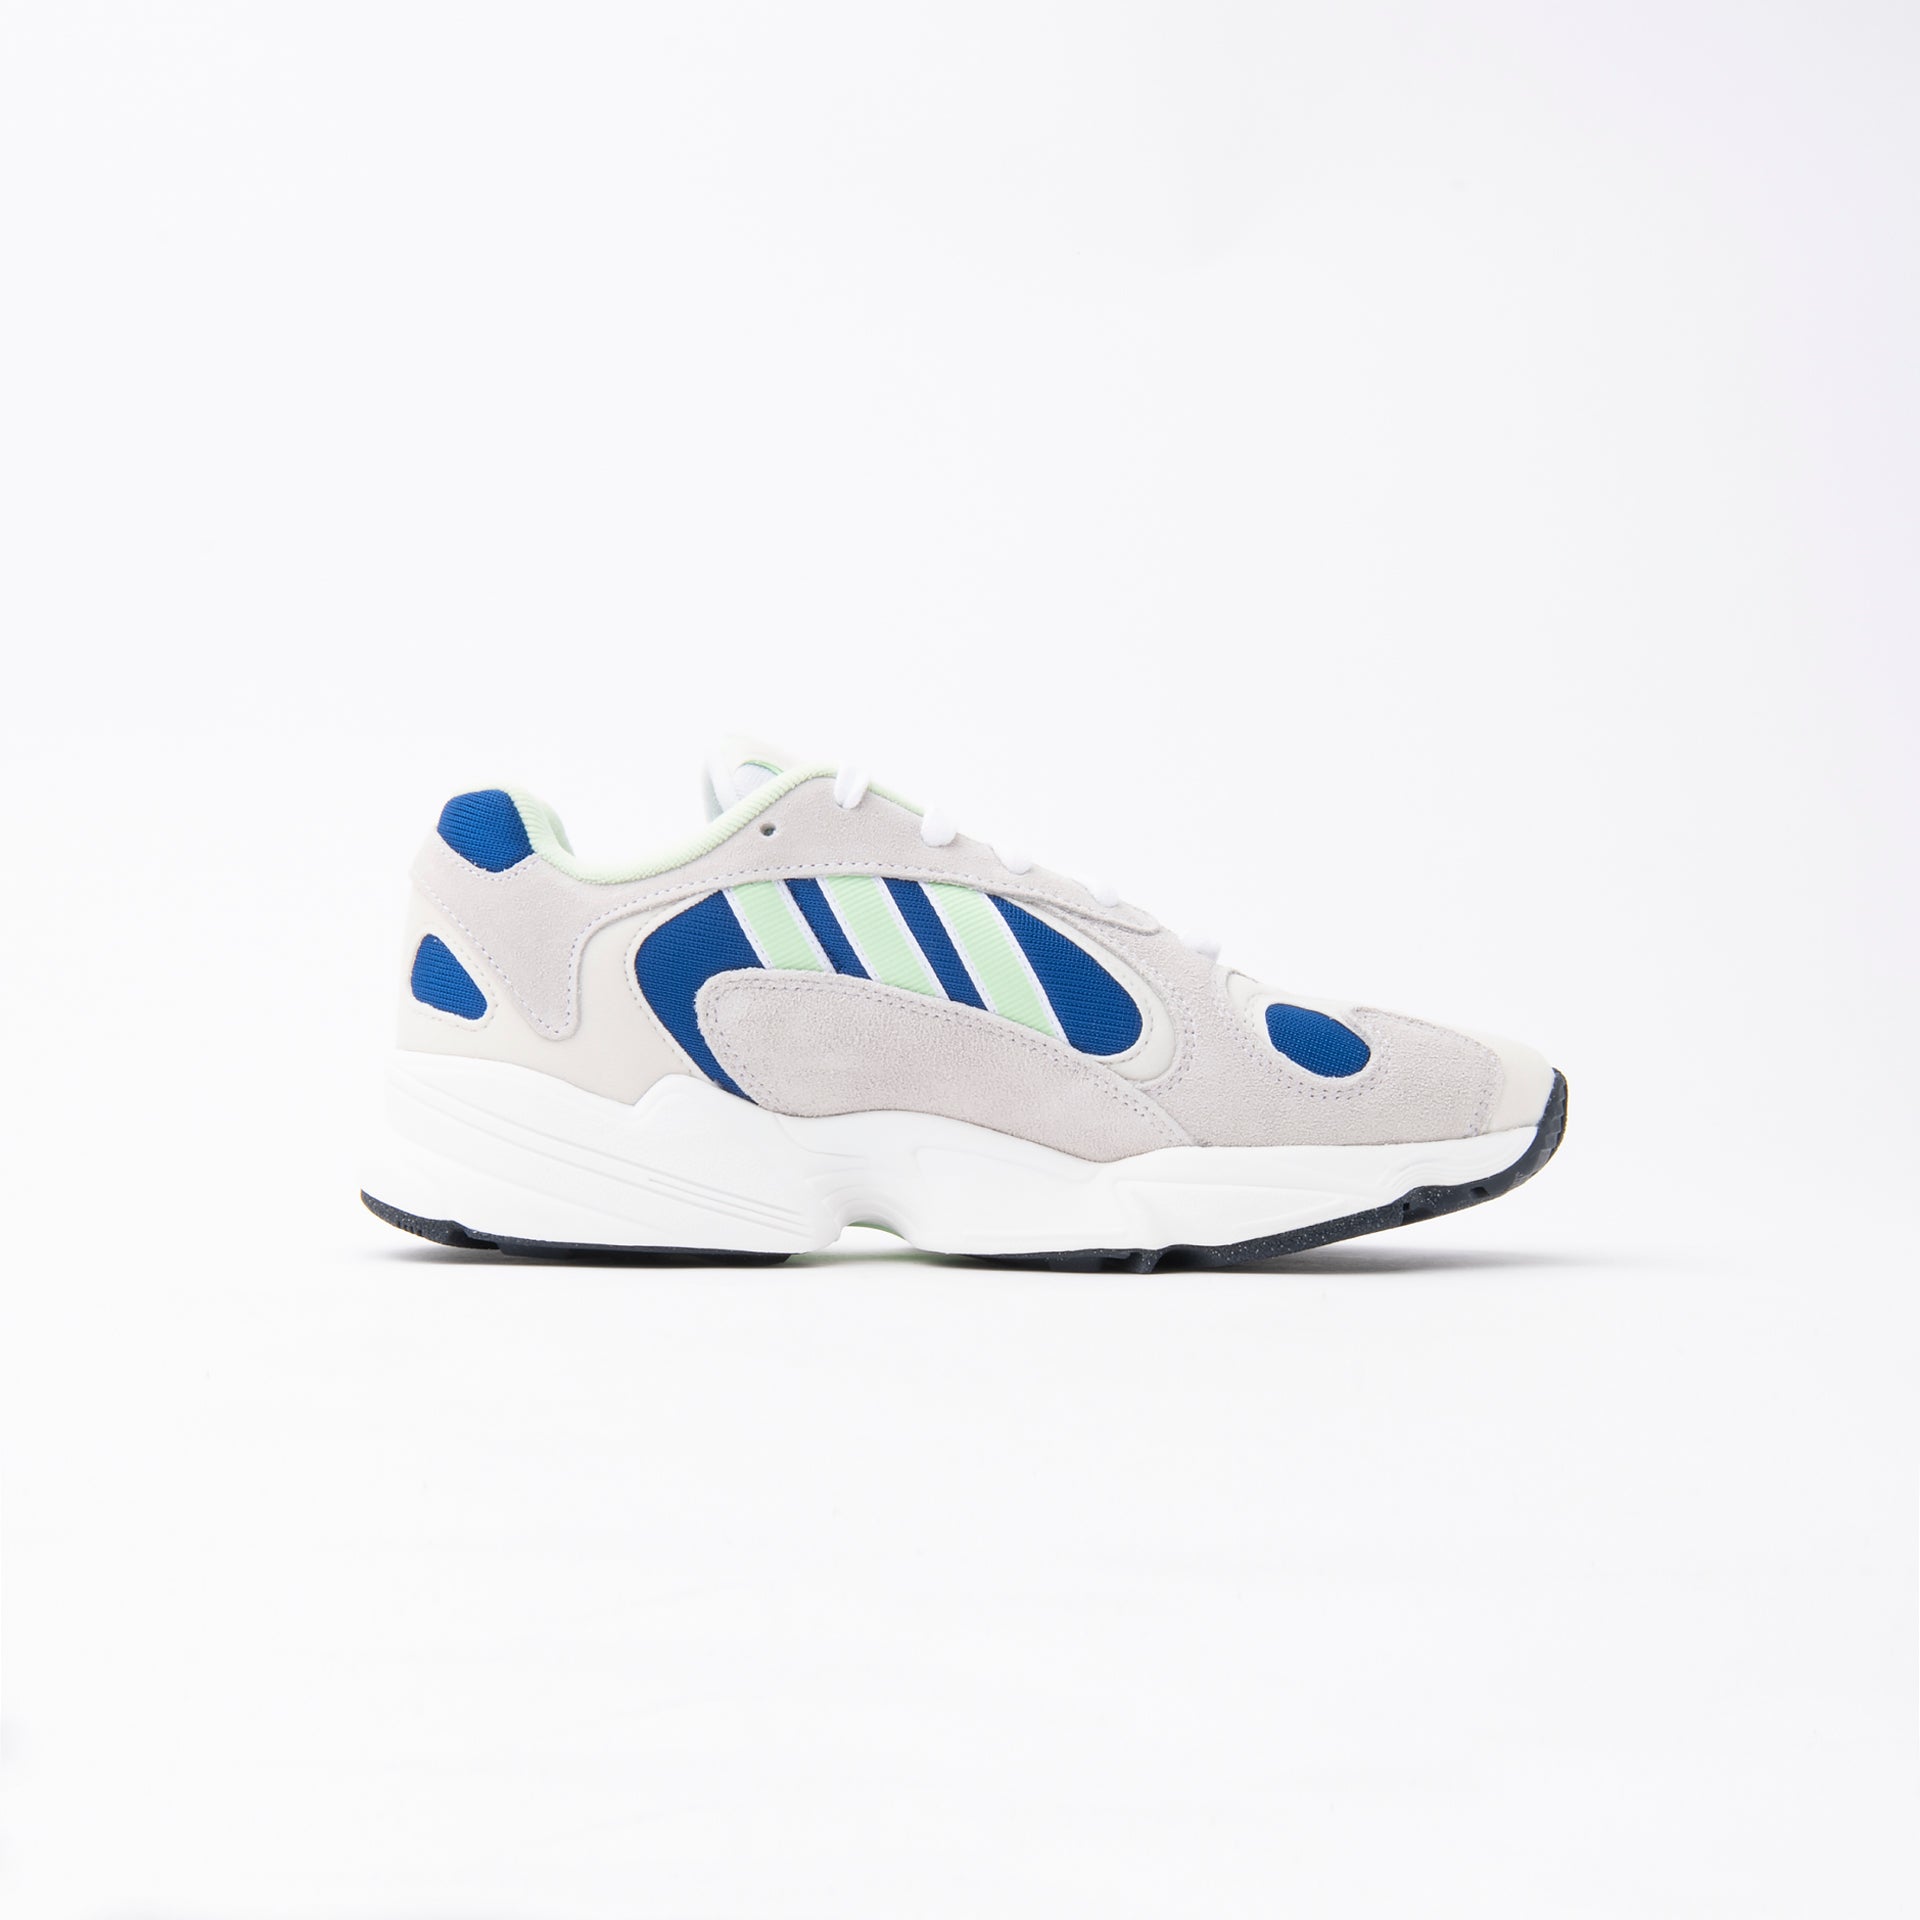 Future White Yung-1 Sneakers From Adidas